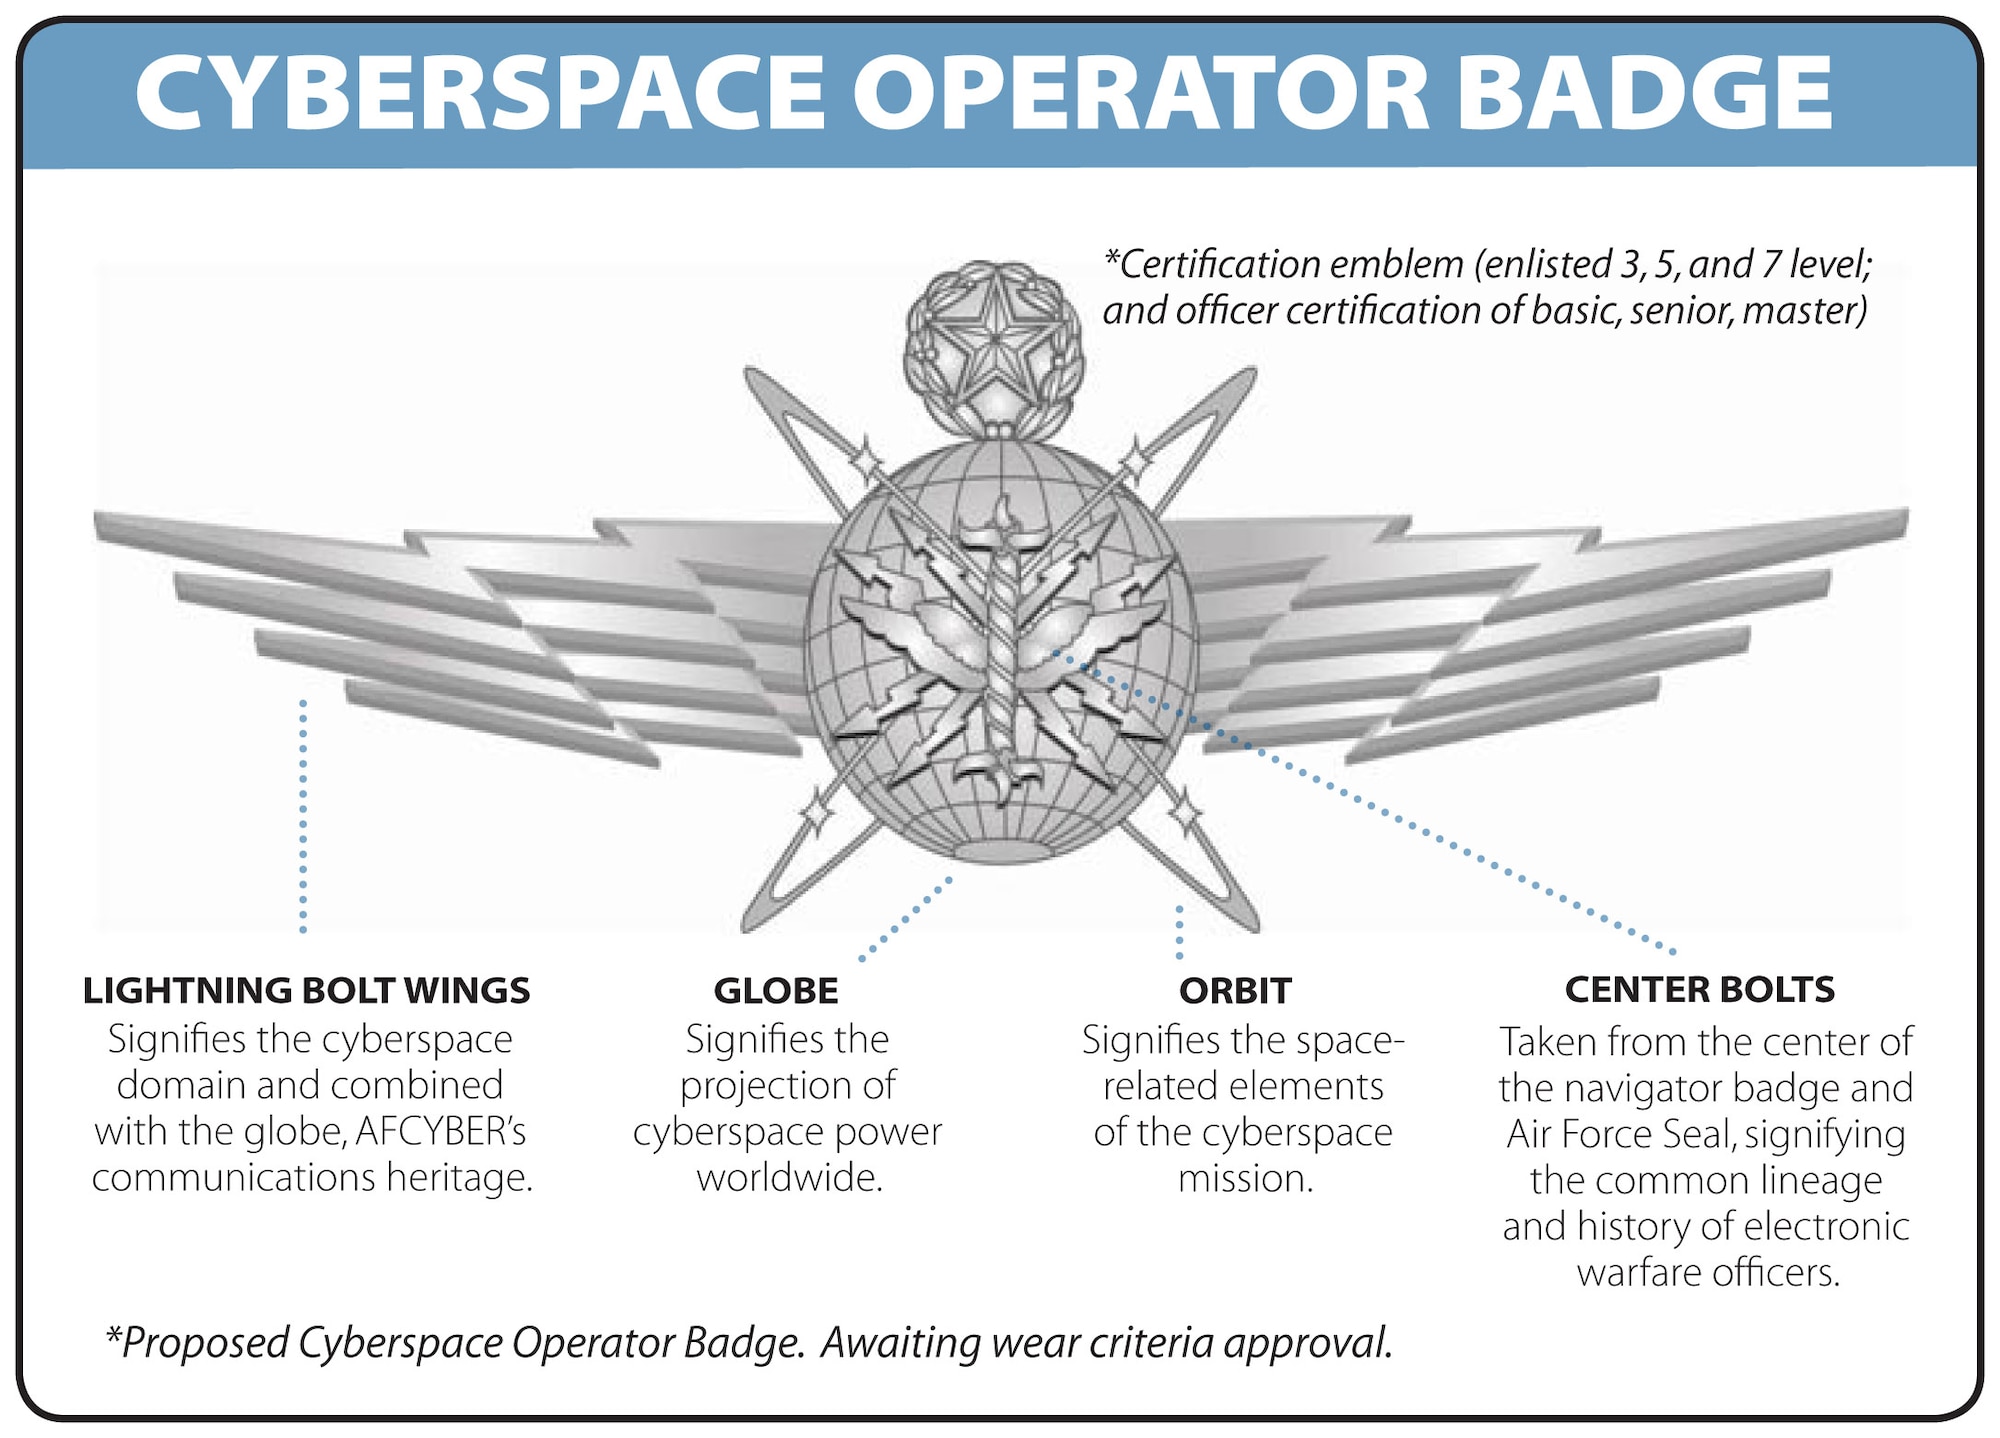 The proposed cyberspace operator badge. The wear criteria is still under review. 
